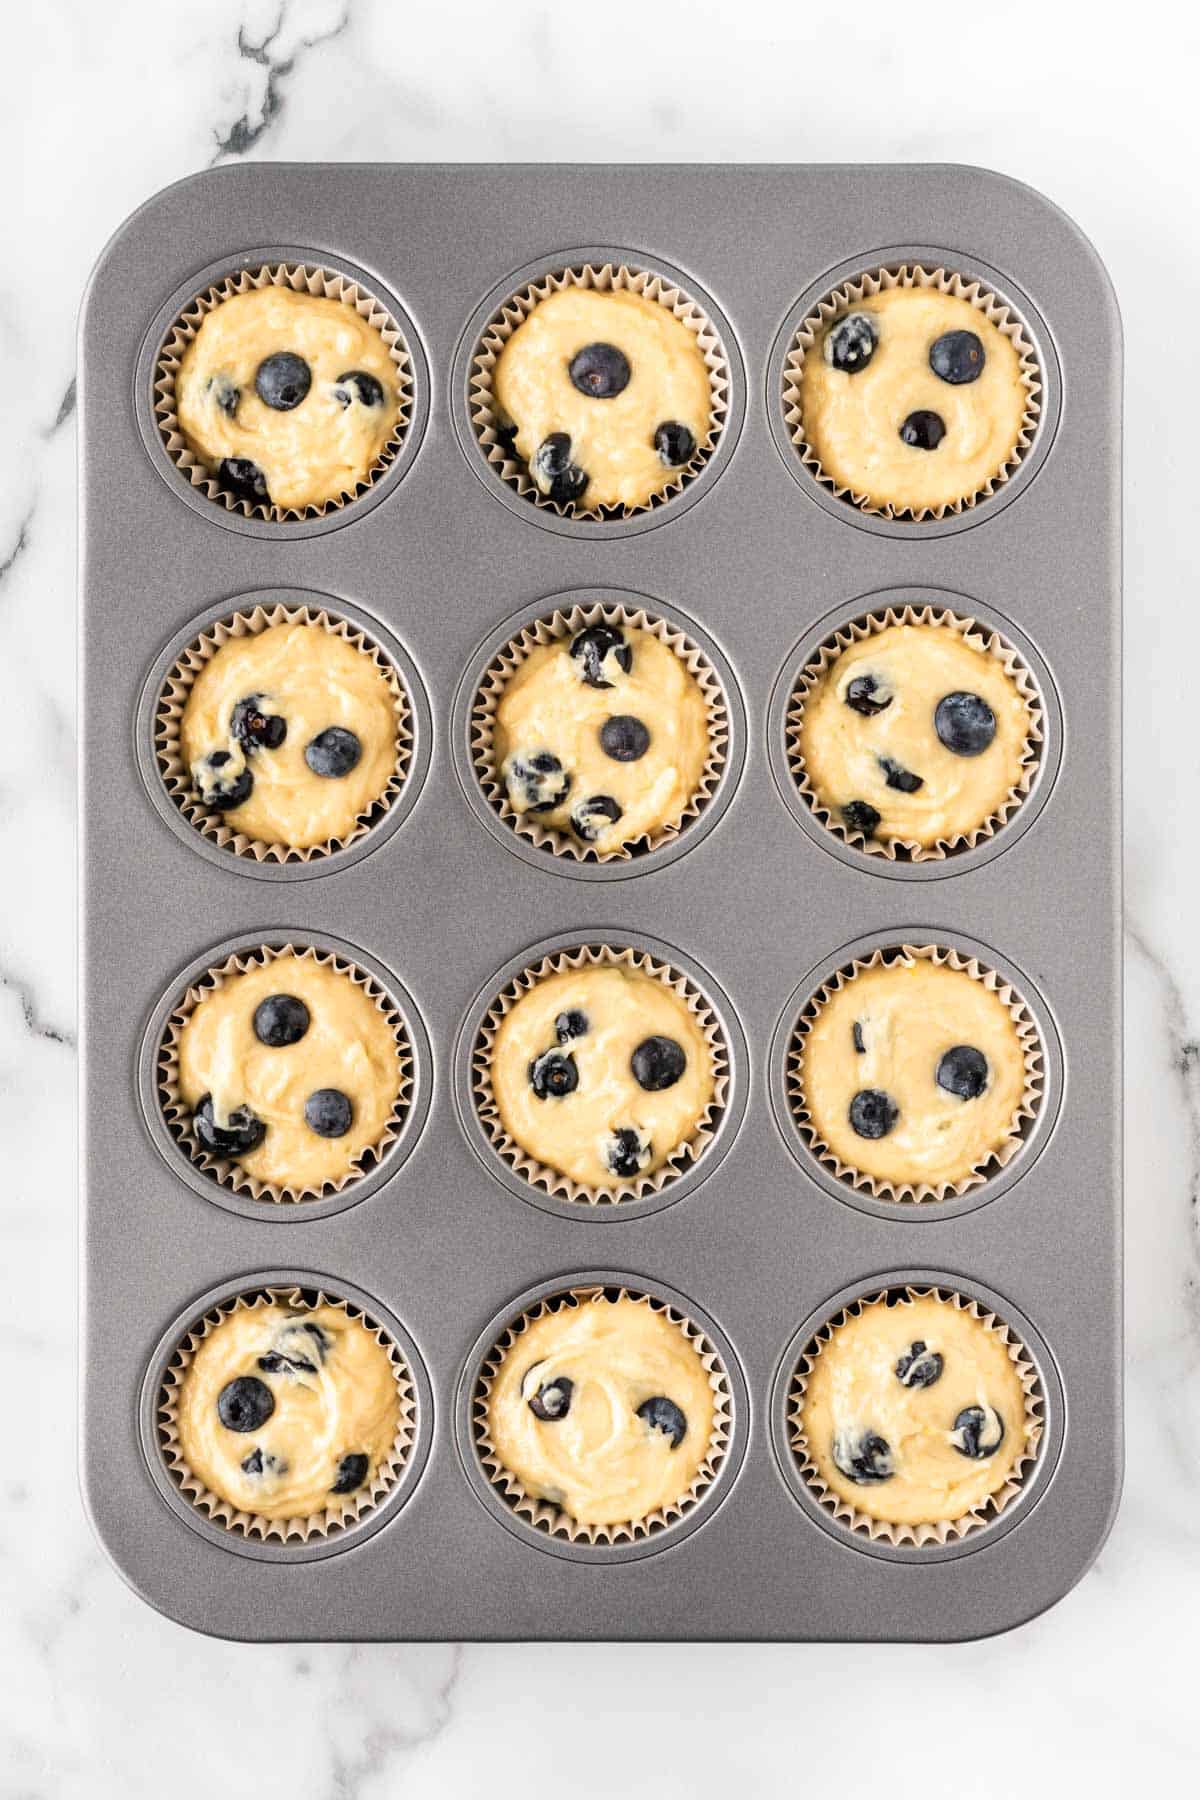 filling muffin tins with muffins batter